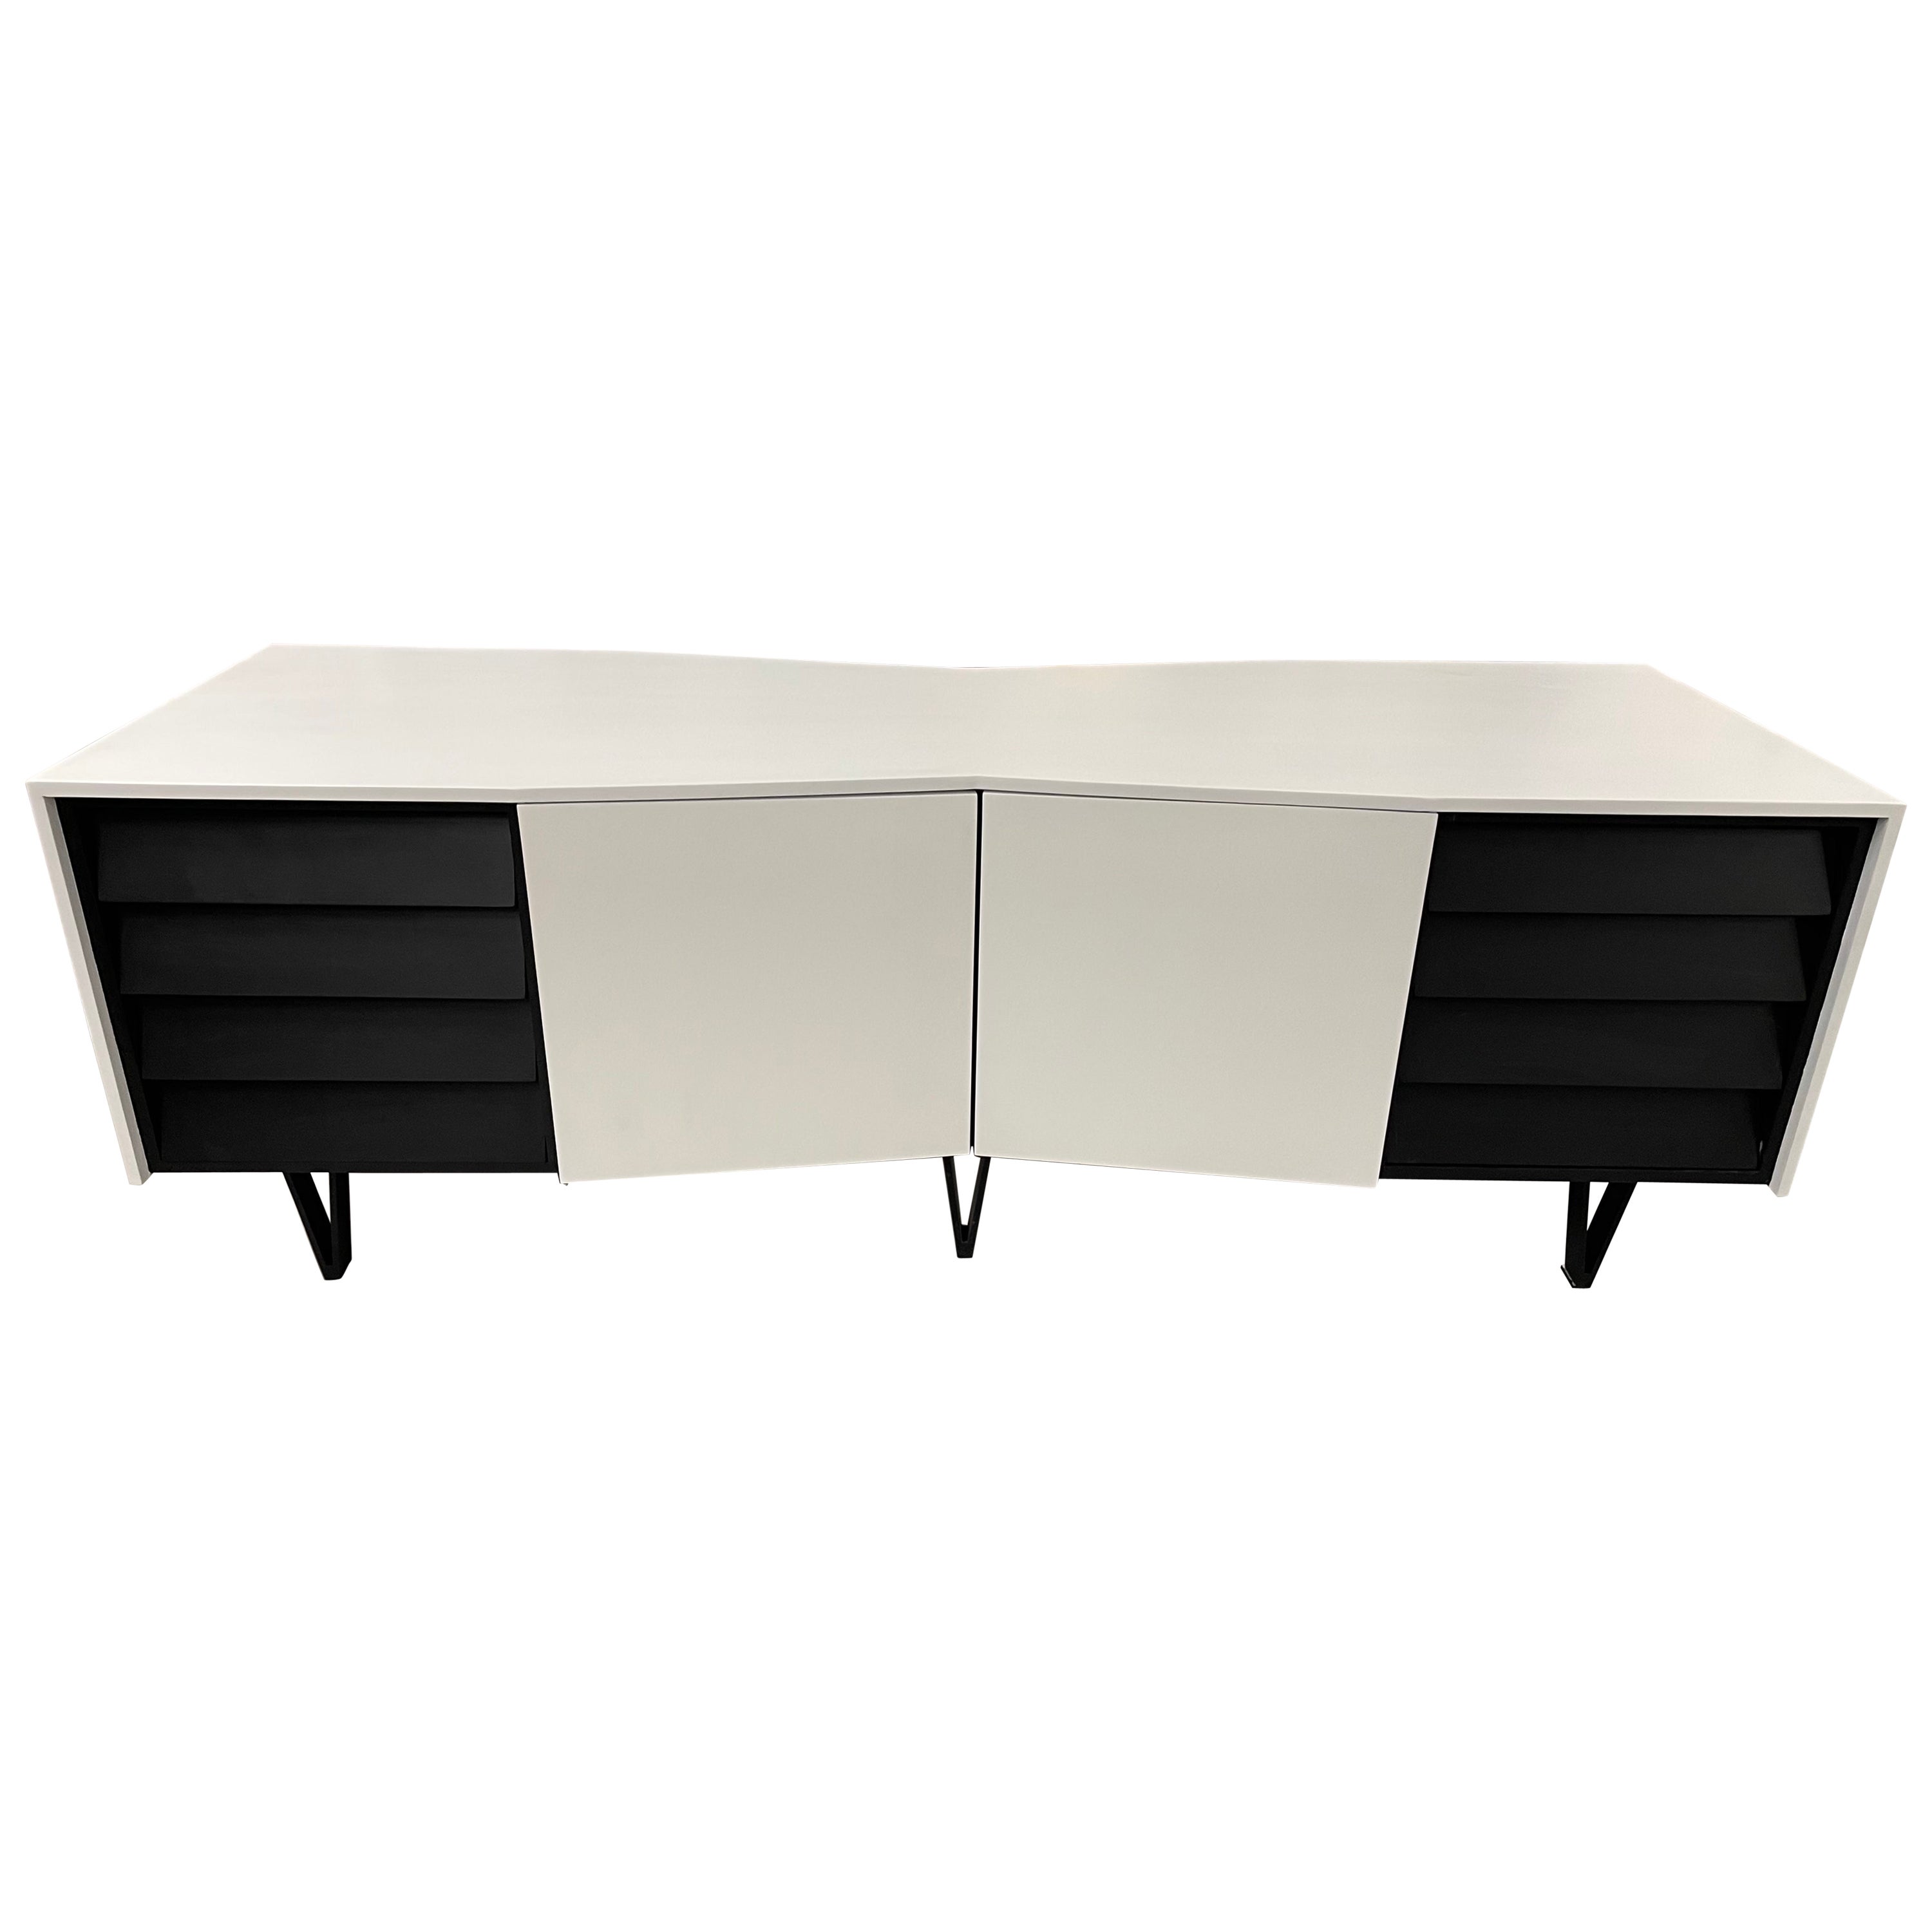 Two Sided Angled Credenza For Sale